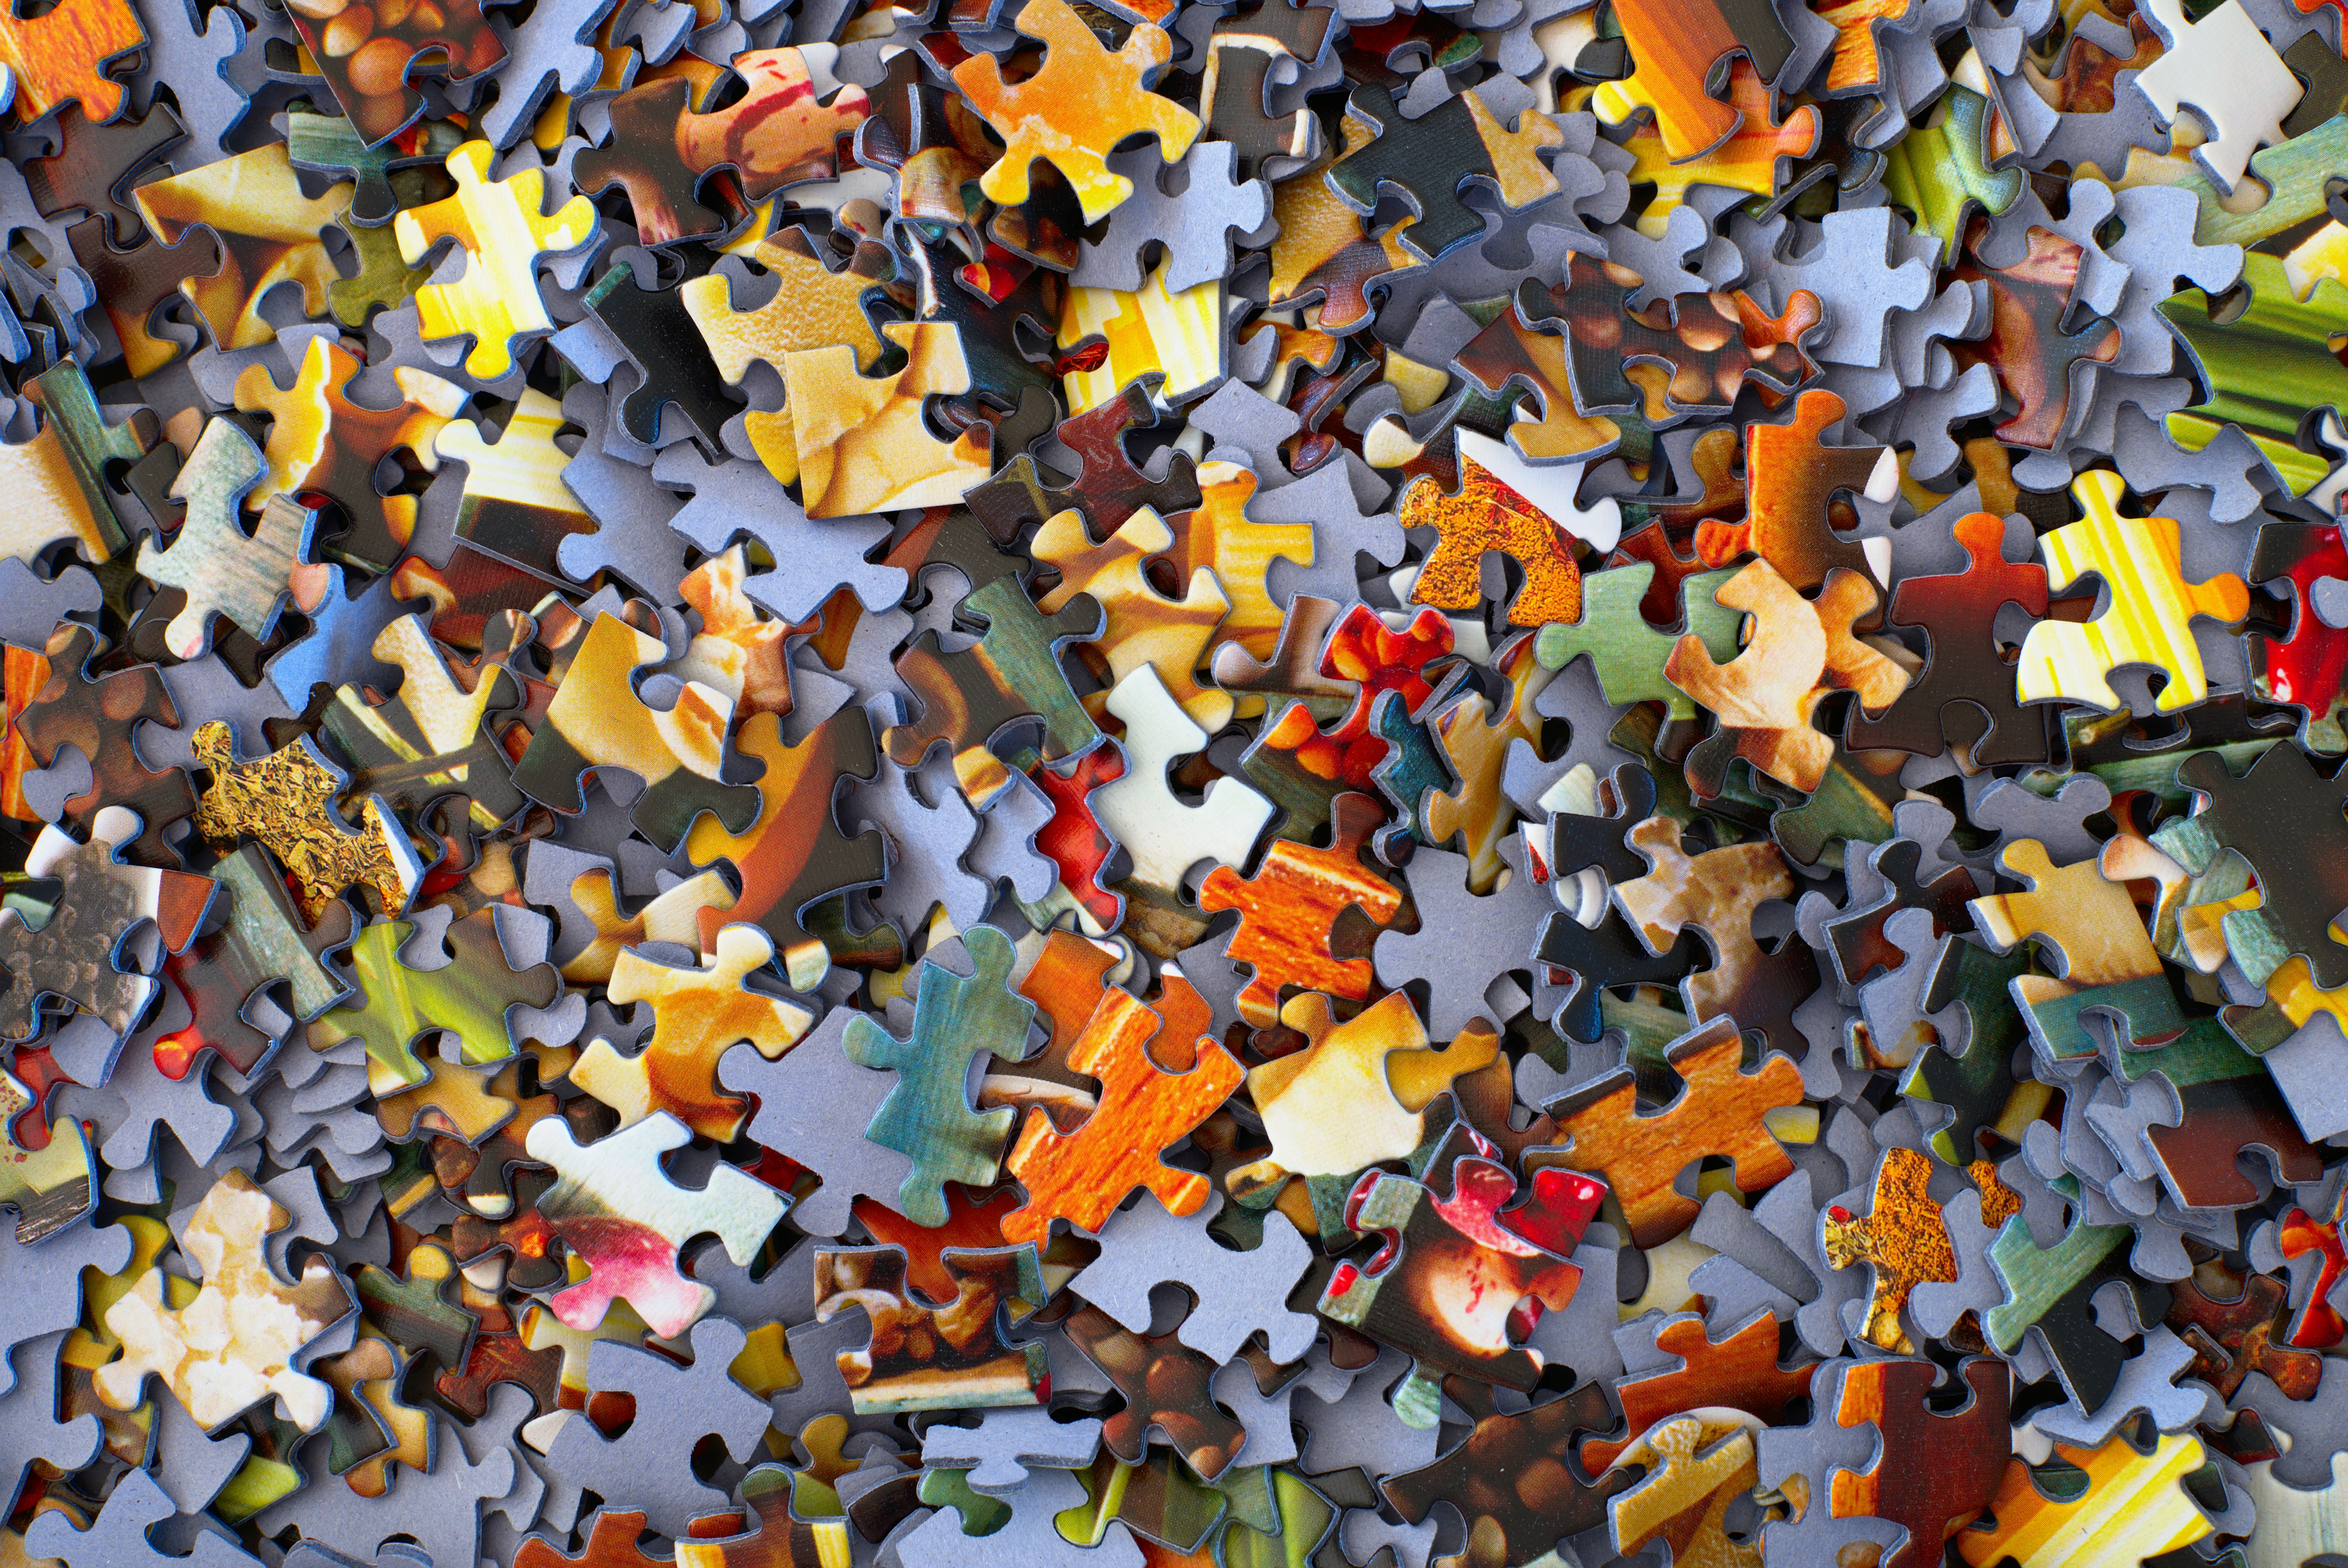 Jigsaw puzzle pieces; image from unsplash.com